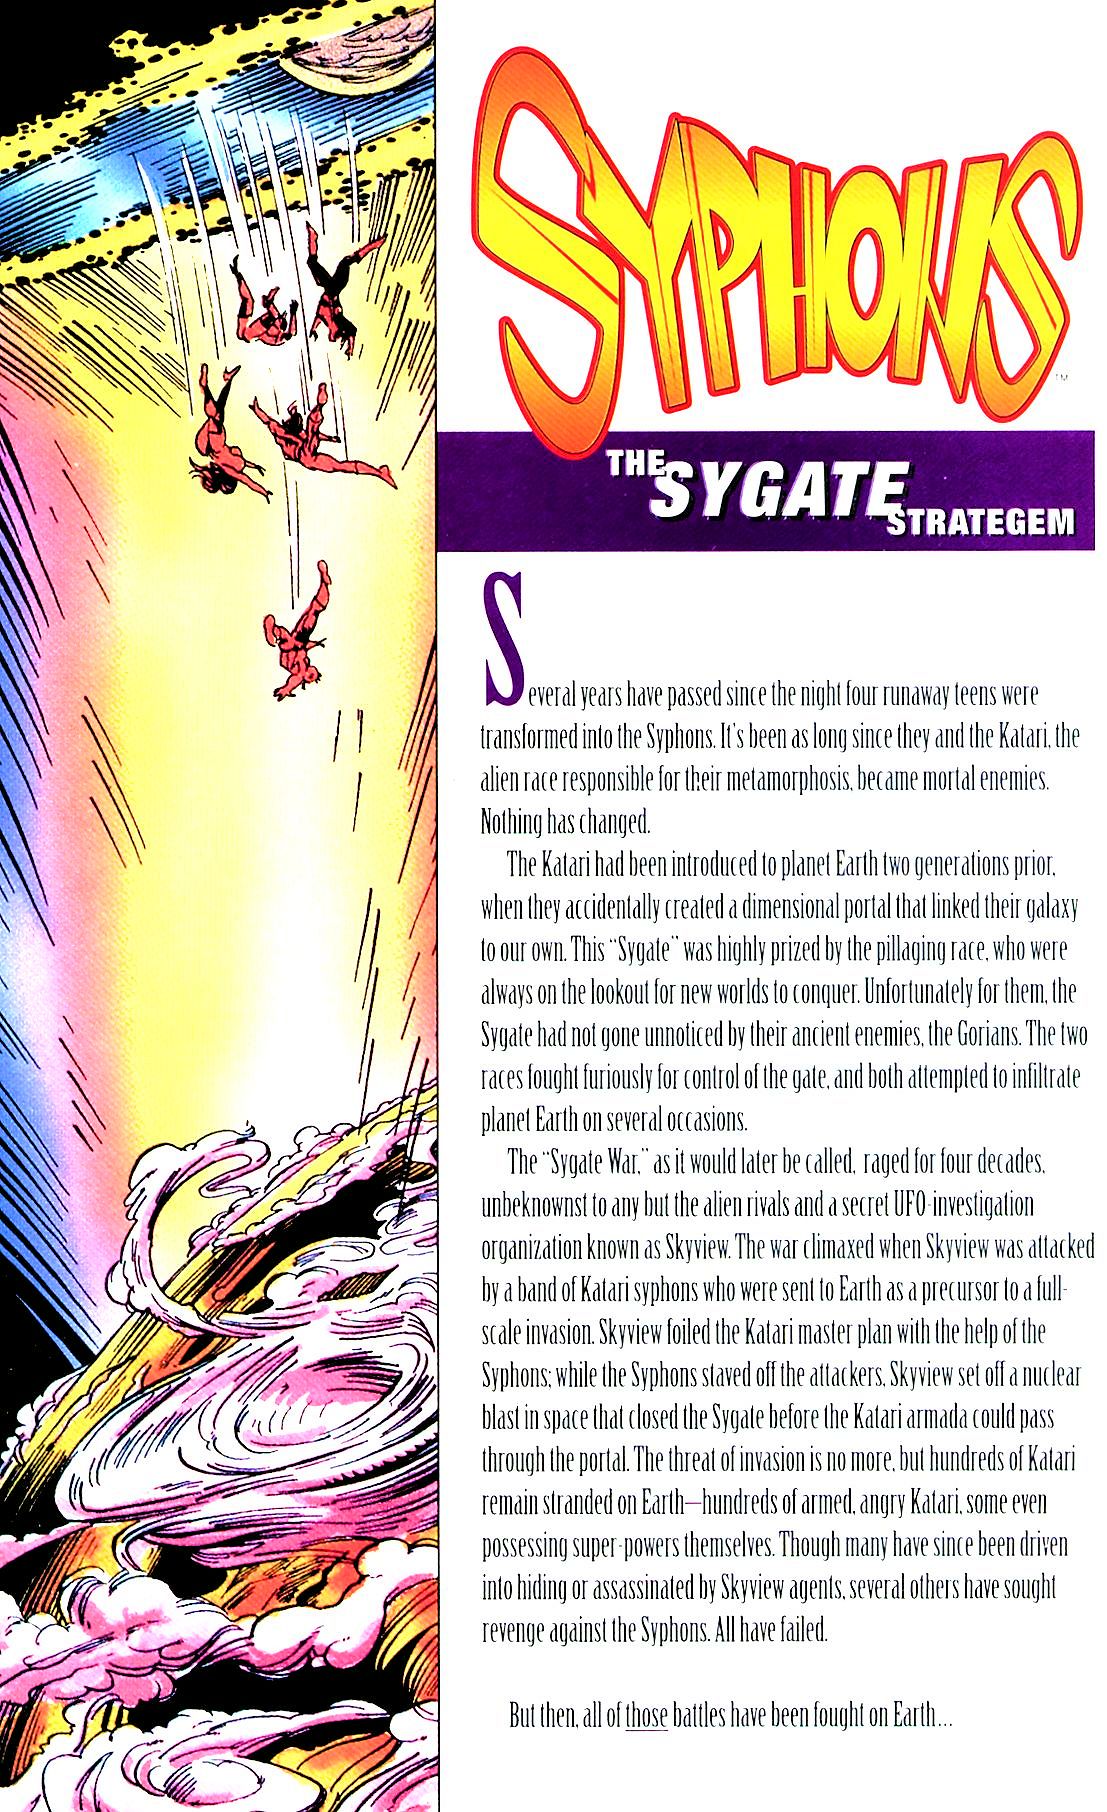 Read online Syphons: The Sygate Strategem comic -  Issue #1 - 2